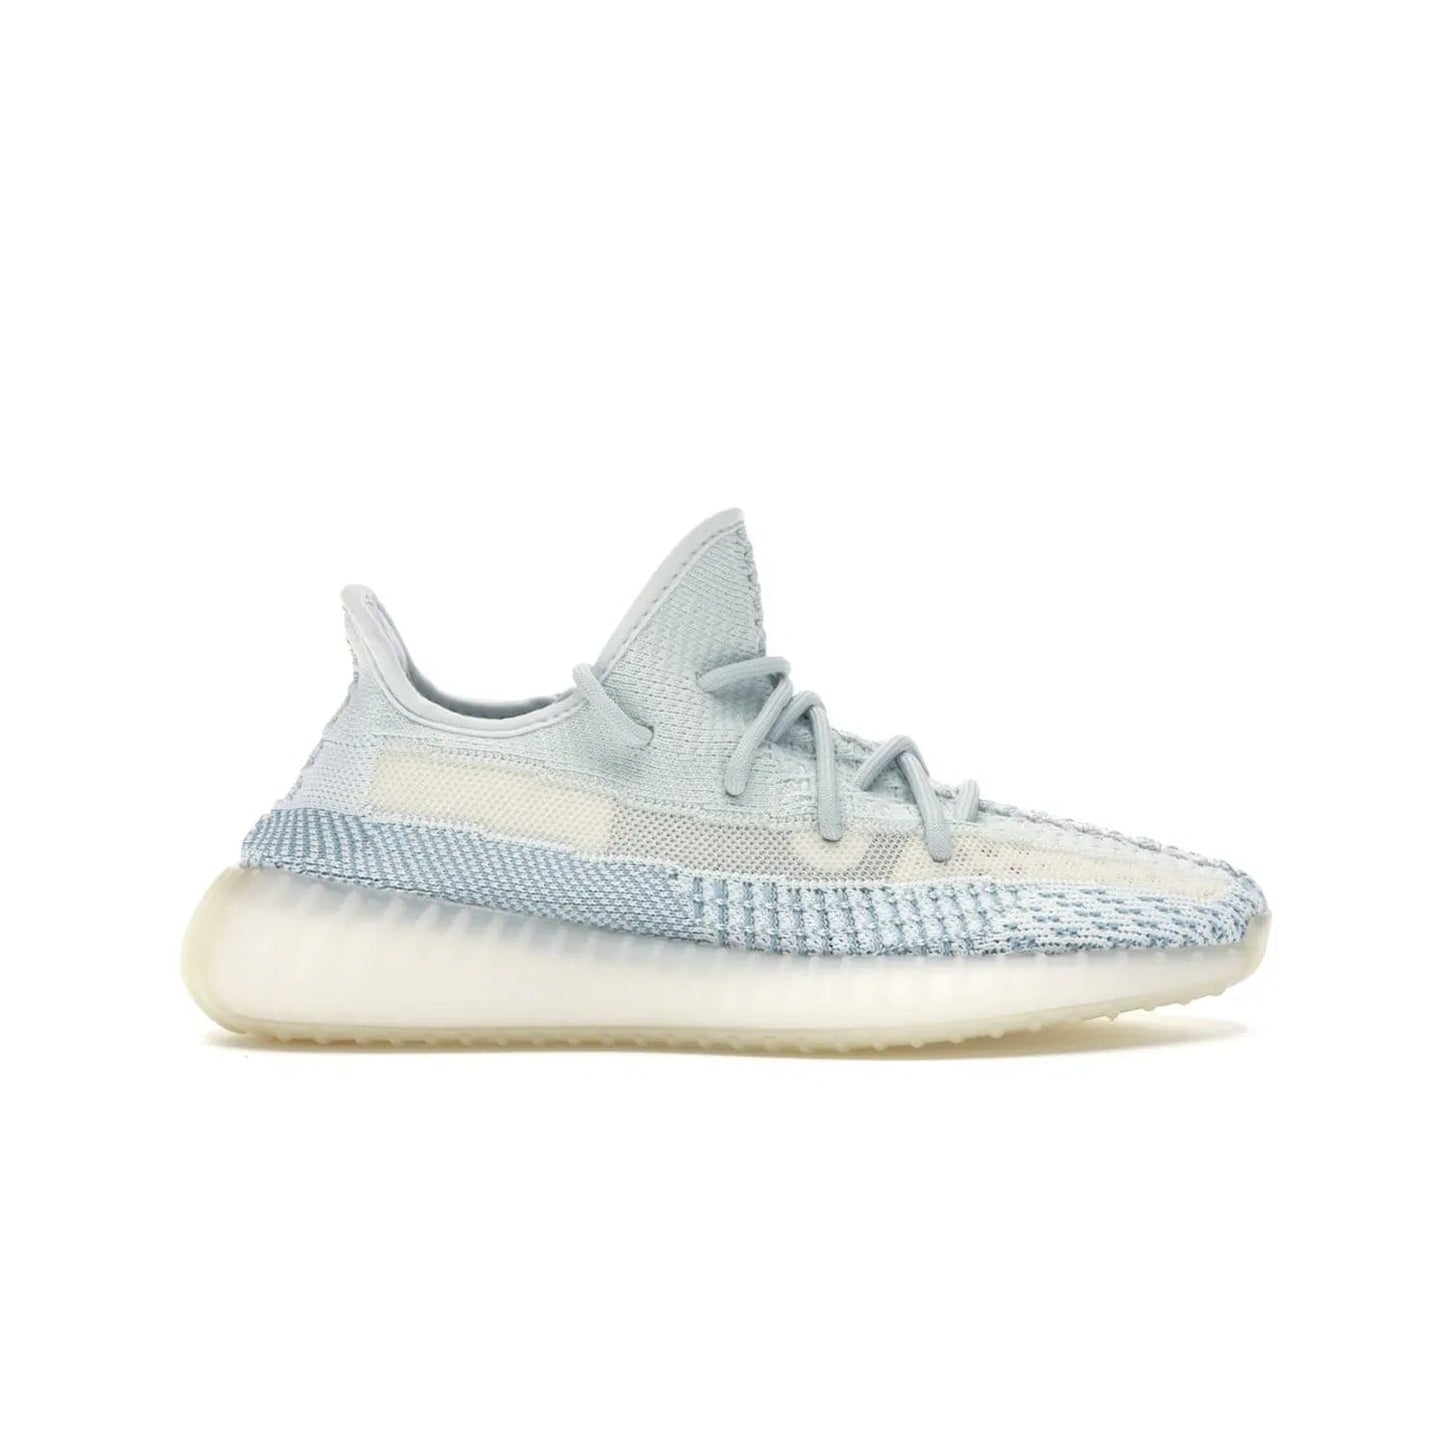 adidas Yeezy Boost 350 V2 Cloud White (Non-Reflective) - Image 1 - Only at www.BallersClubKickz.com - Uniquely designed adidas Yeezy Boost 350 V2 Cloud White (Non-Reflective) with a Primeknit upper in shades of cream and blue with a contrasting hard sole. A fashion-forward sneaker with a transparent strip and blue-and-white patterns.